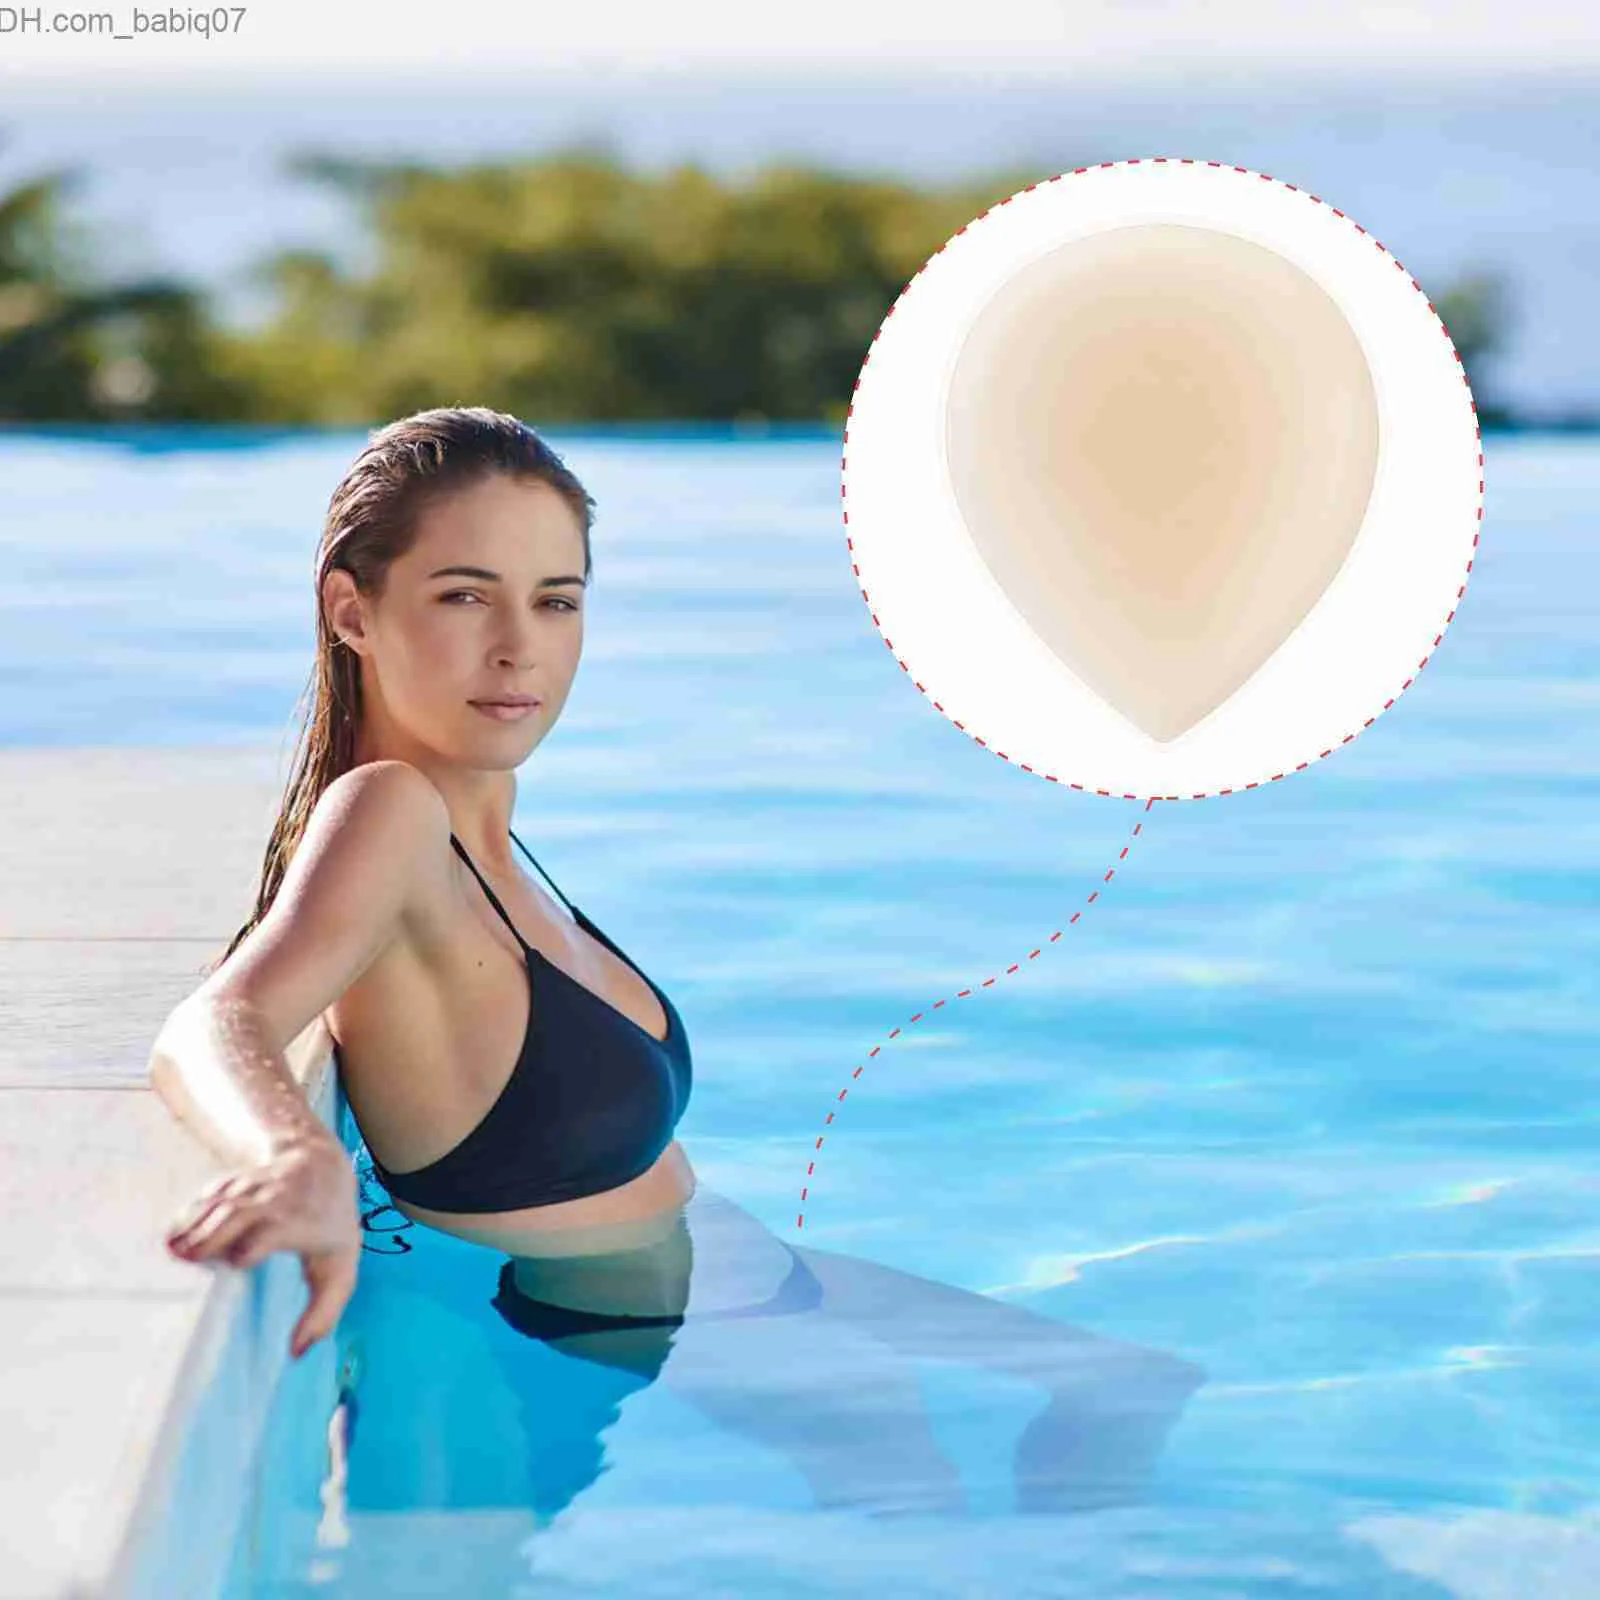 Silicone Bandeau Adhesive Nursing Pads For Swimming For Women Ideal For  Bikini, Swimming And More Z230717 From Babiq07, $3.72